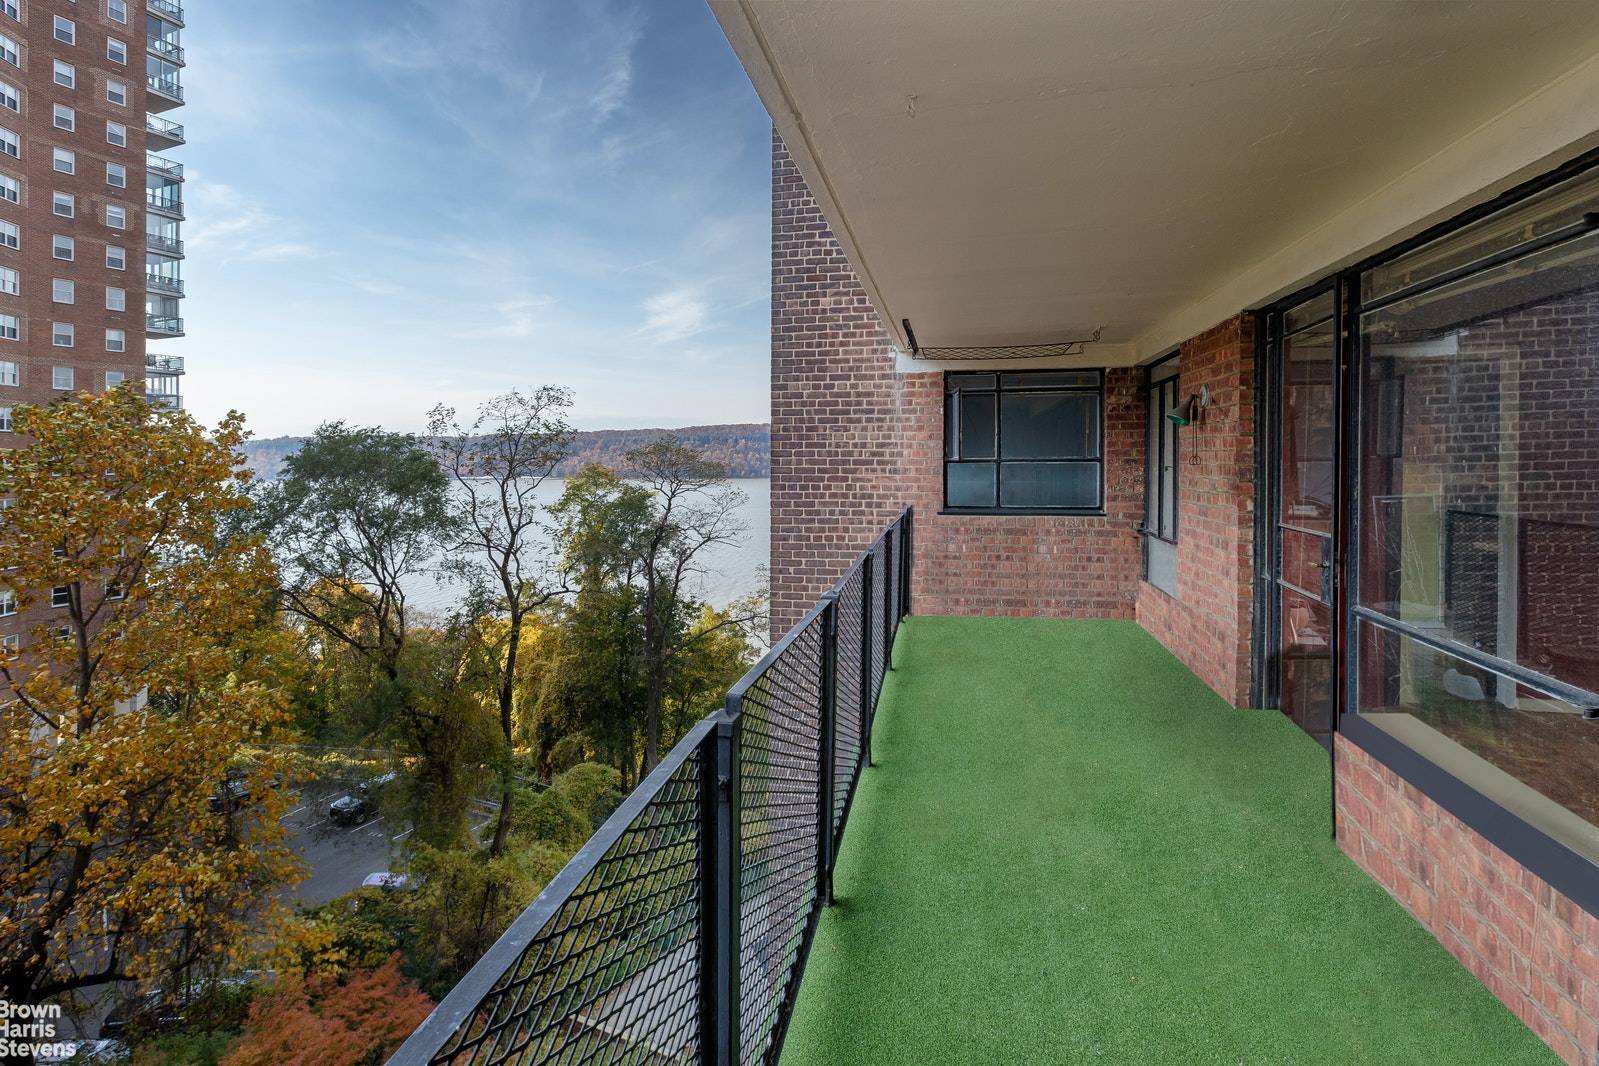 Welcome to Highpoint on the Hudson, Riverdale's most prominent mid century coop built by noted architect Henry Kibel.